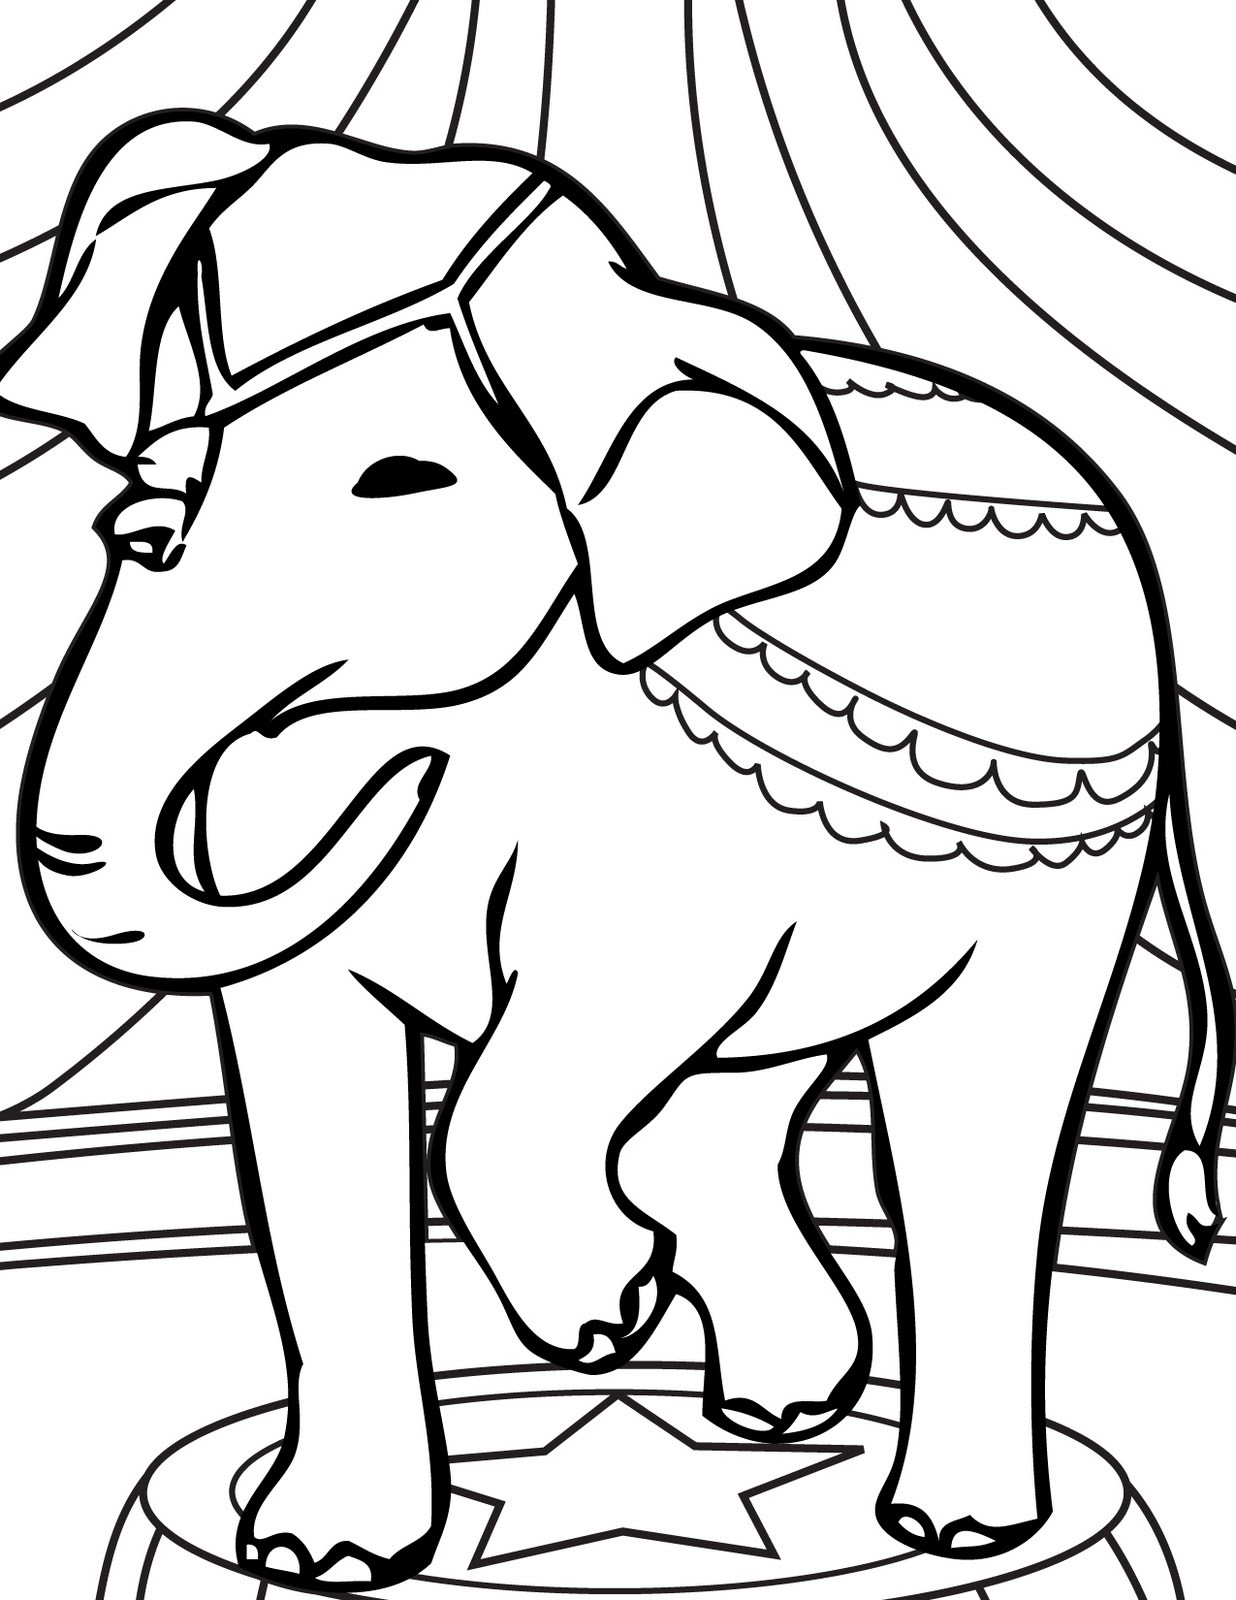 Toddler Coloring Pages
 transmissionpress Circus Elephant Coloring Pages